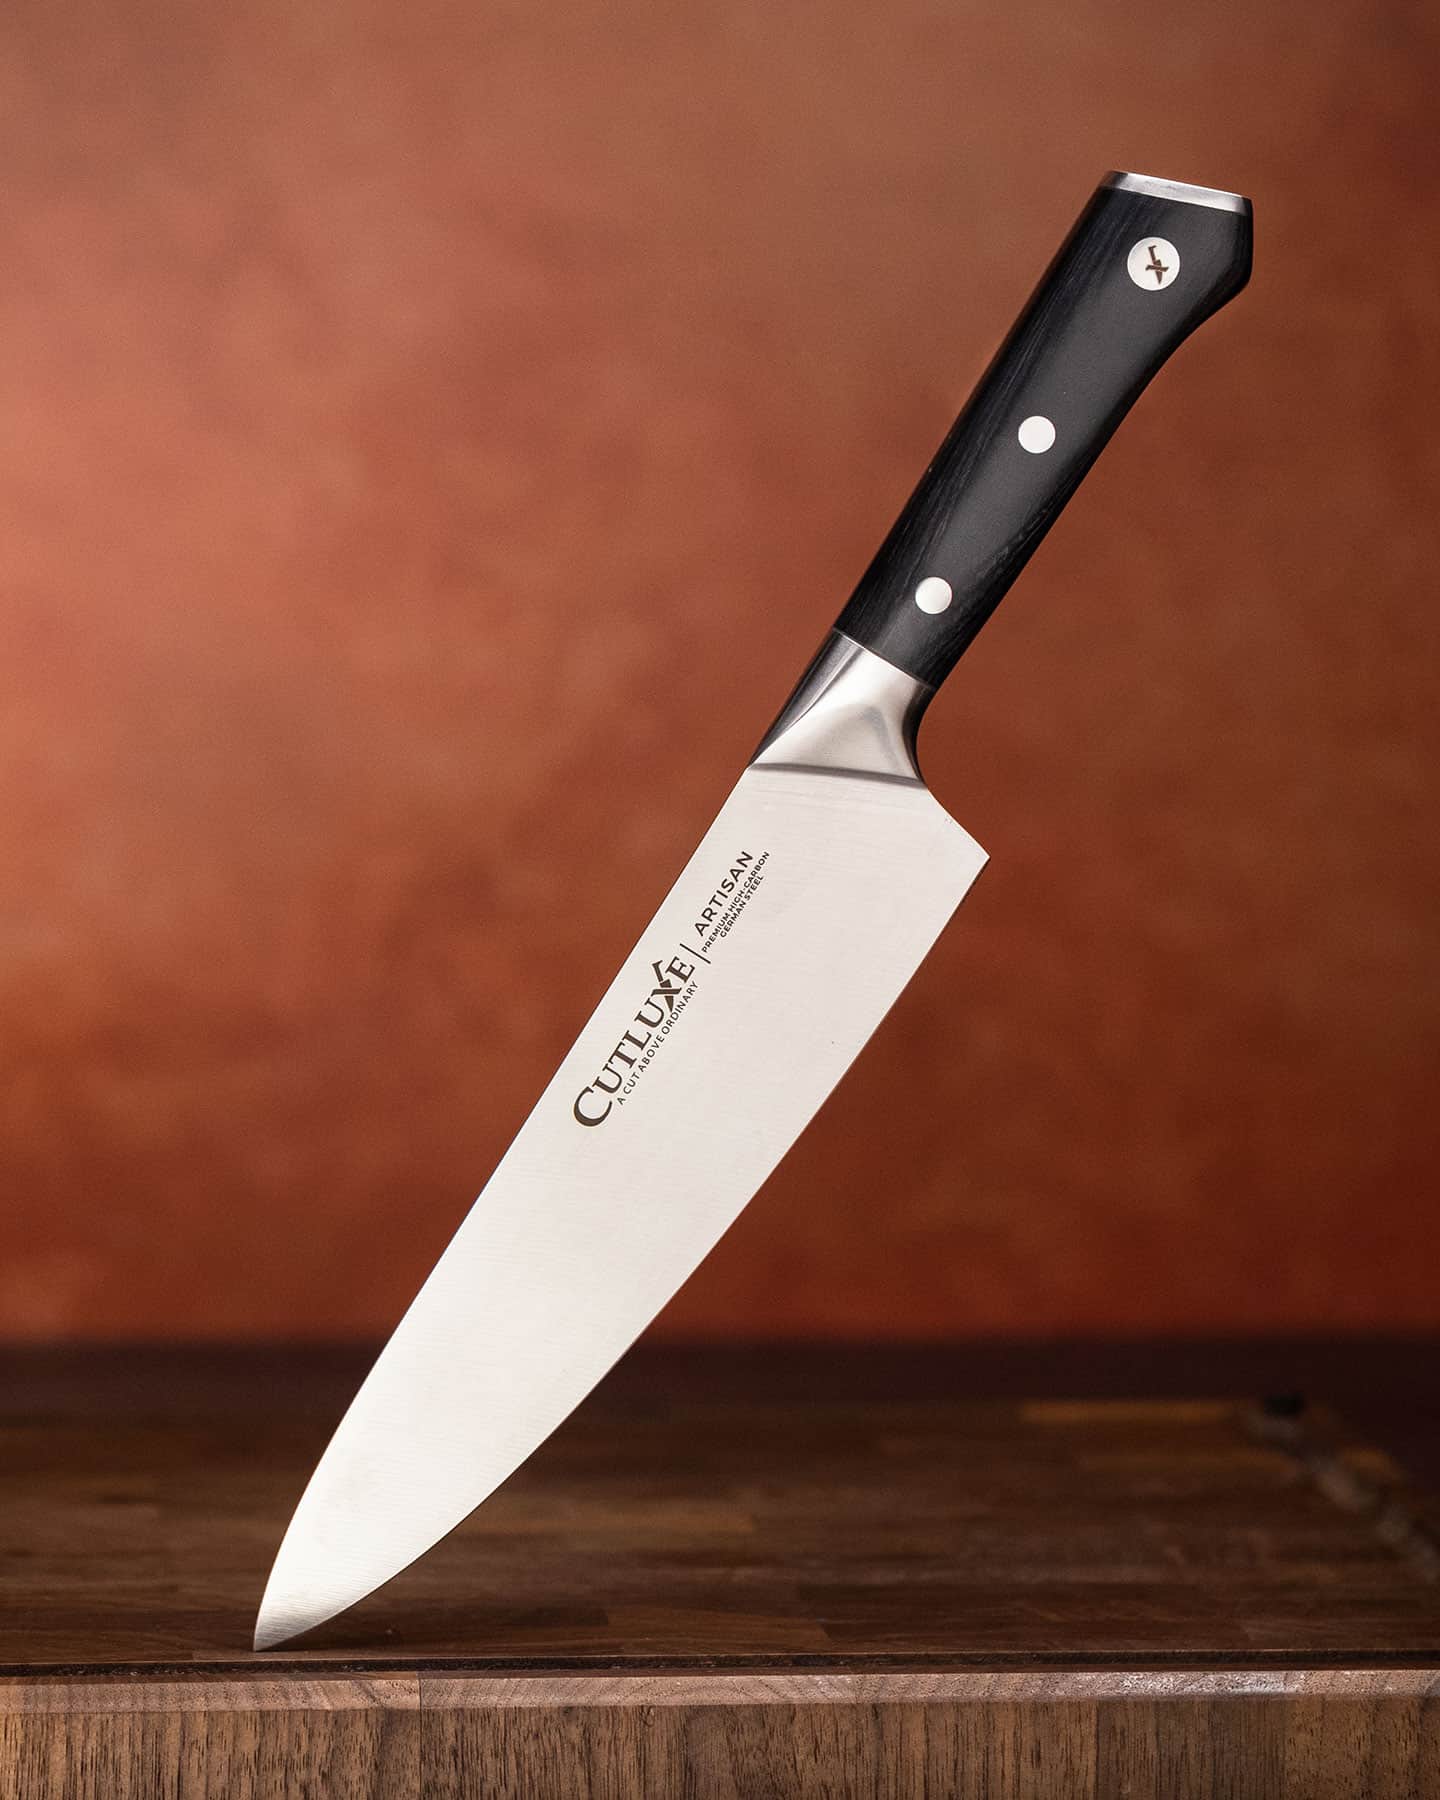 The Cutluxe Artisan 8 inch chef knife is well designed with good fit and finish.